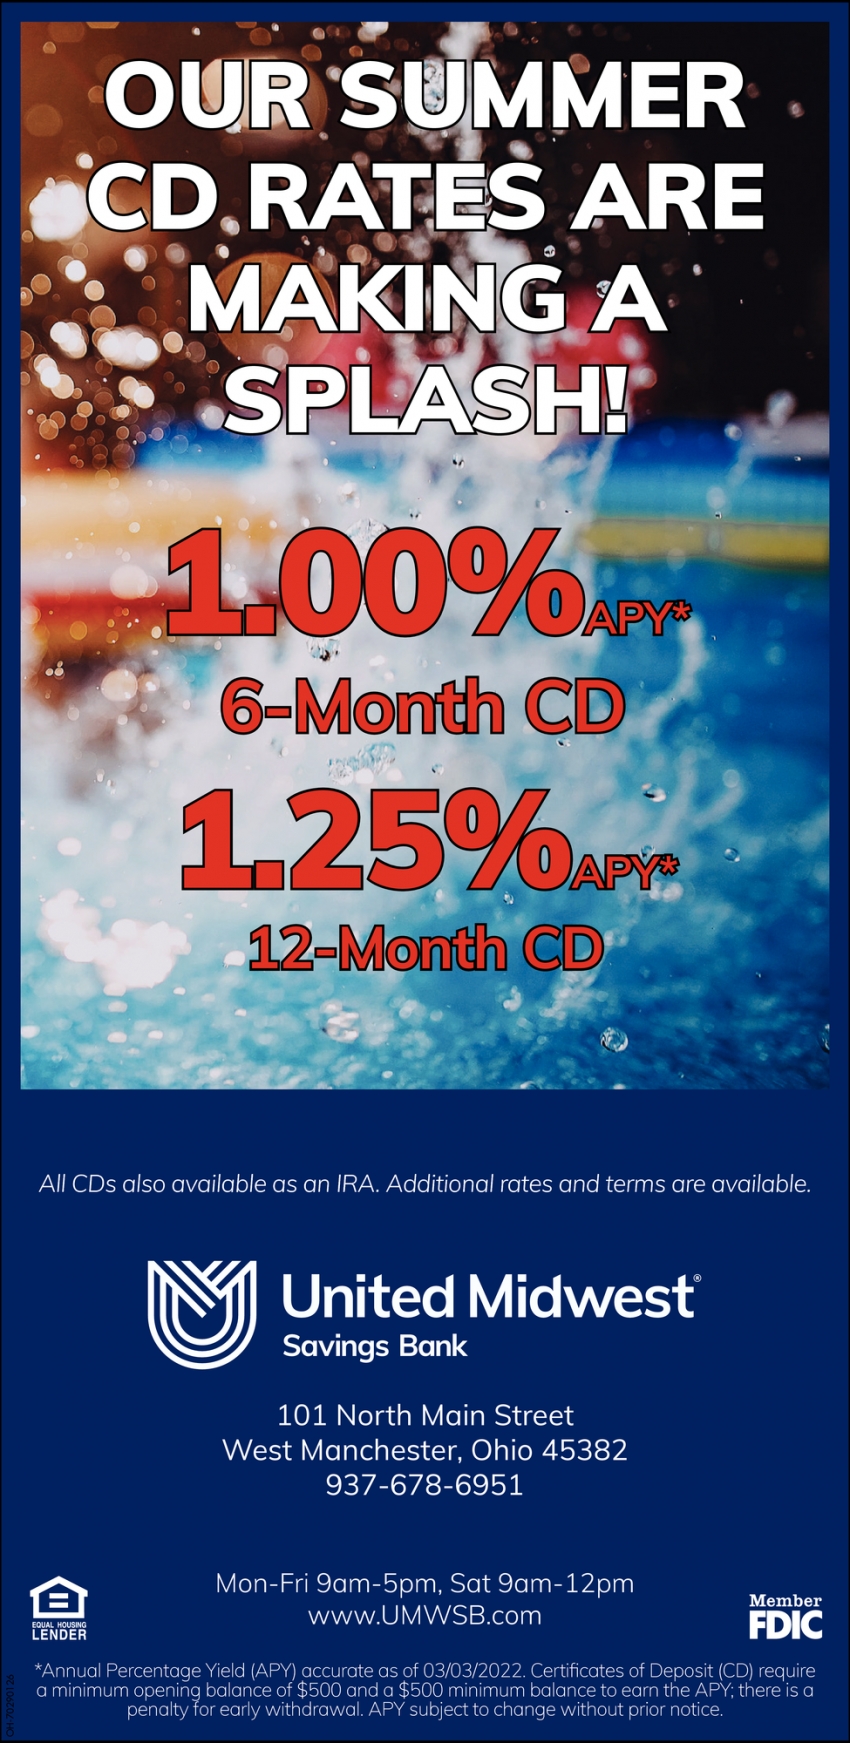 Our Summer CD Rates Are Making A Splash!